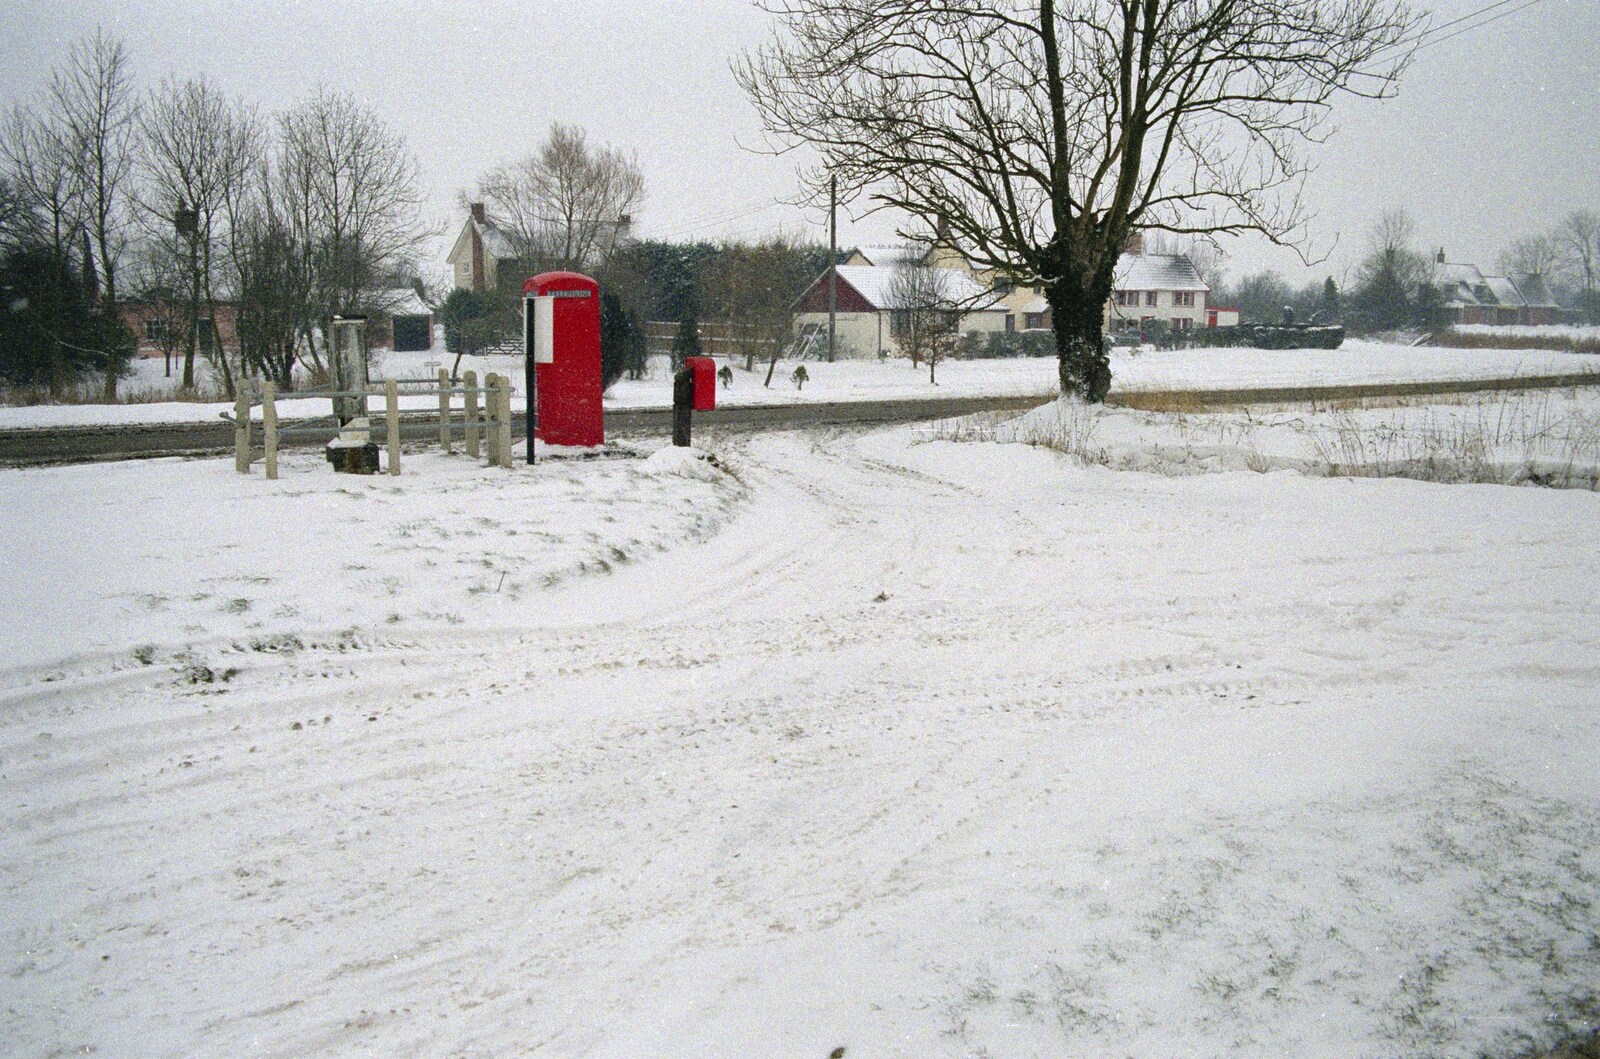 Stuston's red K6 phone box in the snow from Sledging on the Common and Some Music, Stuston, Suffolk - 5th February 1991